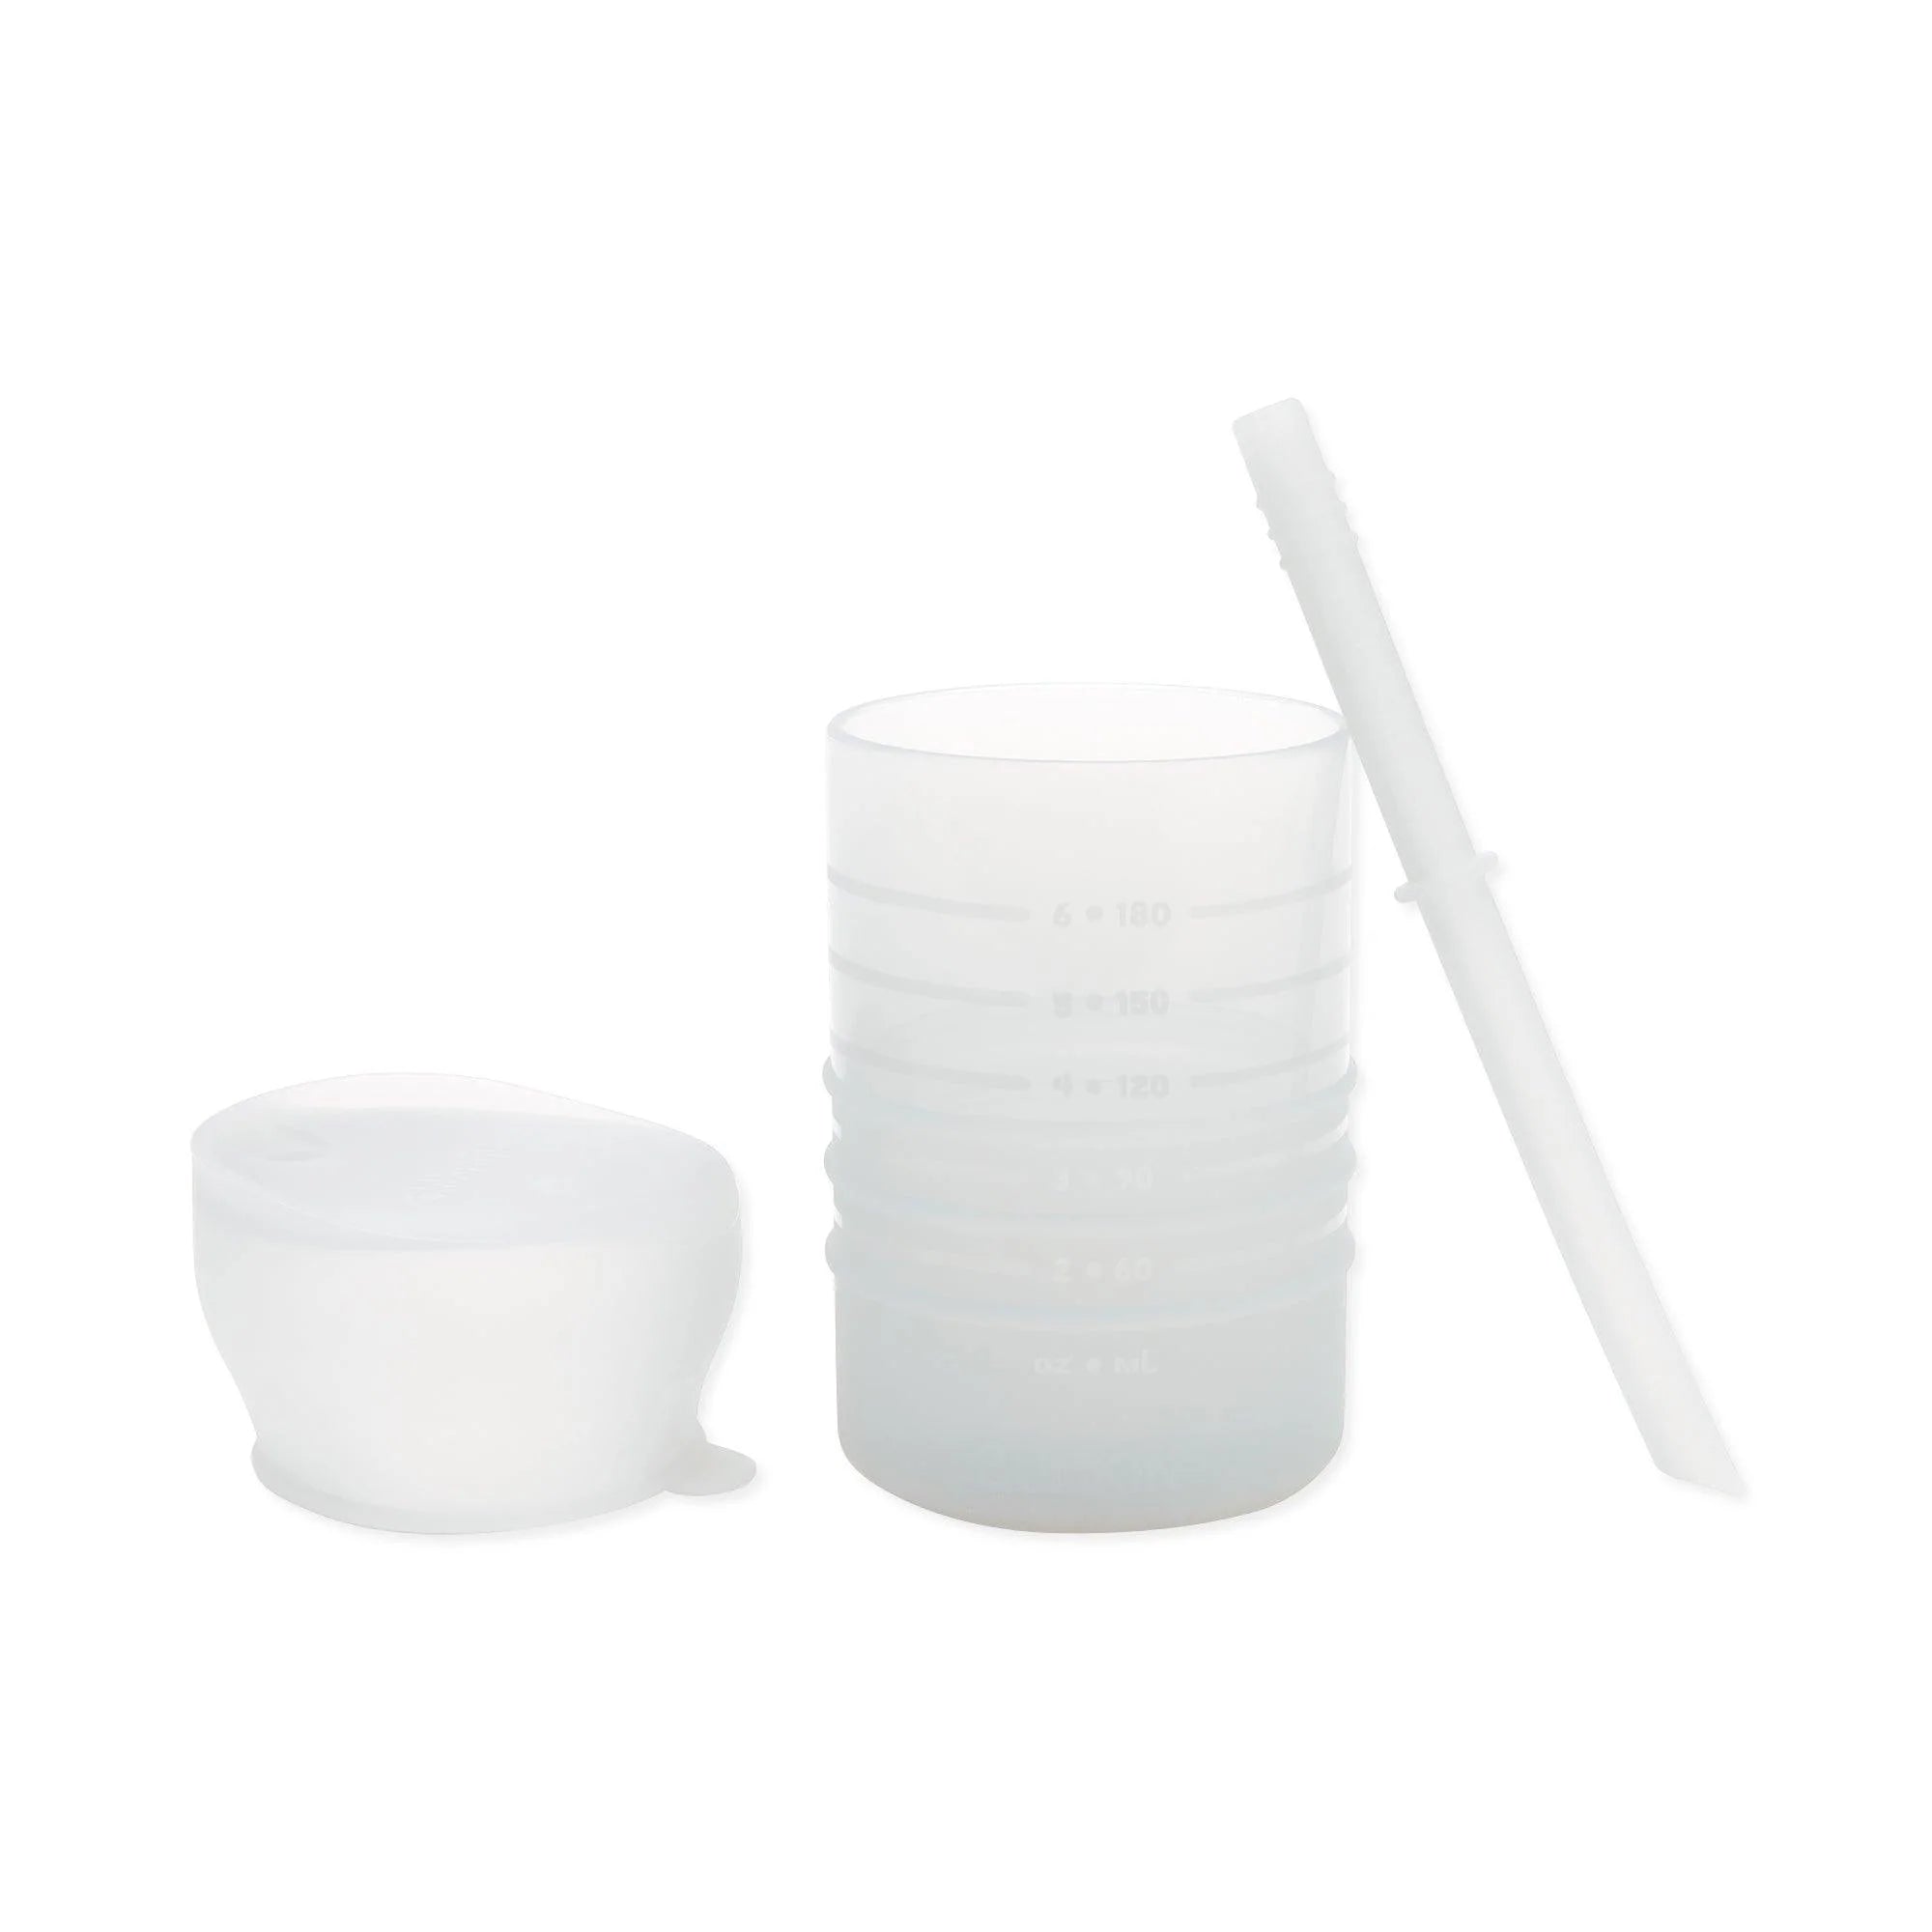 HOTUT Silicone Baby Straw Cup, 210ml/7oz Silicone Training Cup